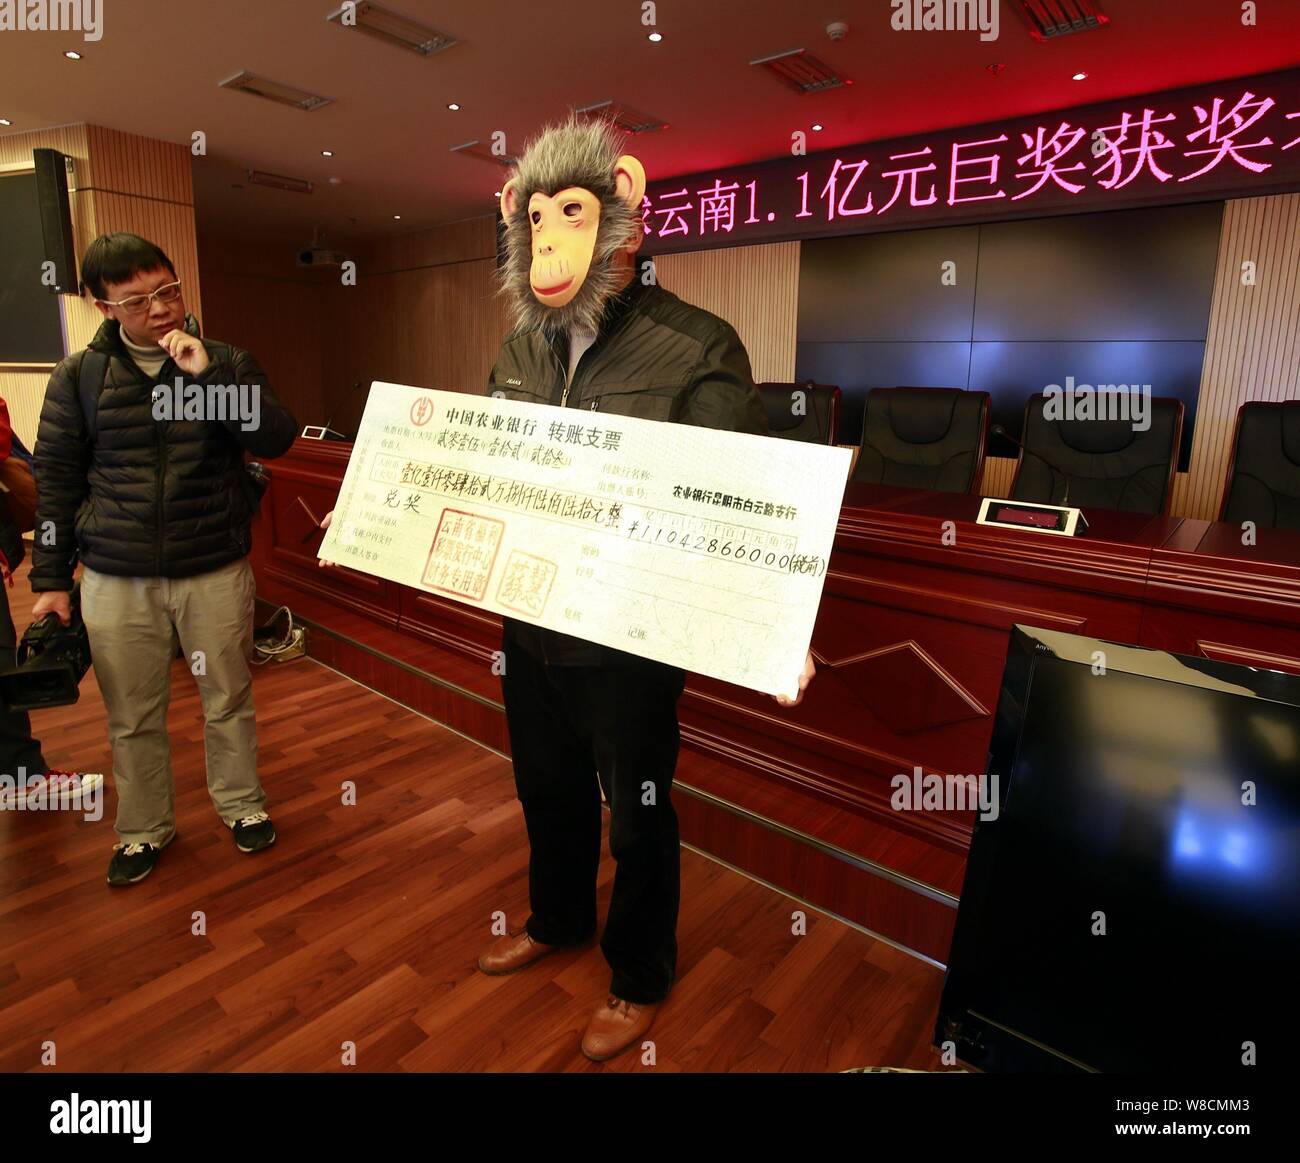 påske Registrering Broom The 110 million yuan ($17 million lottery winner, right, wearing a monkey  face mask poses with his check during a ceremony at a lottery center in  Kunm Stock Photo - Alamy